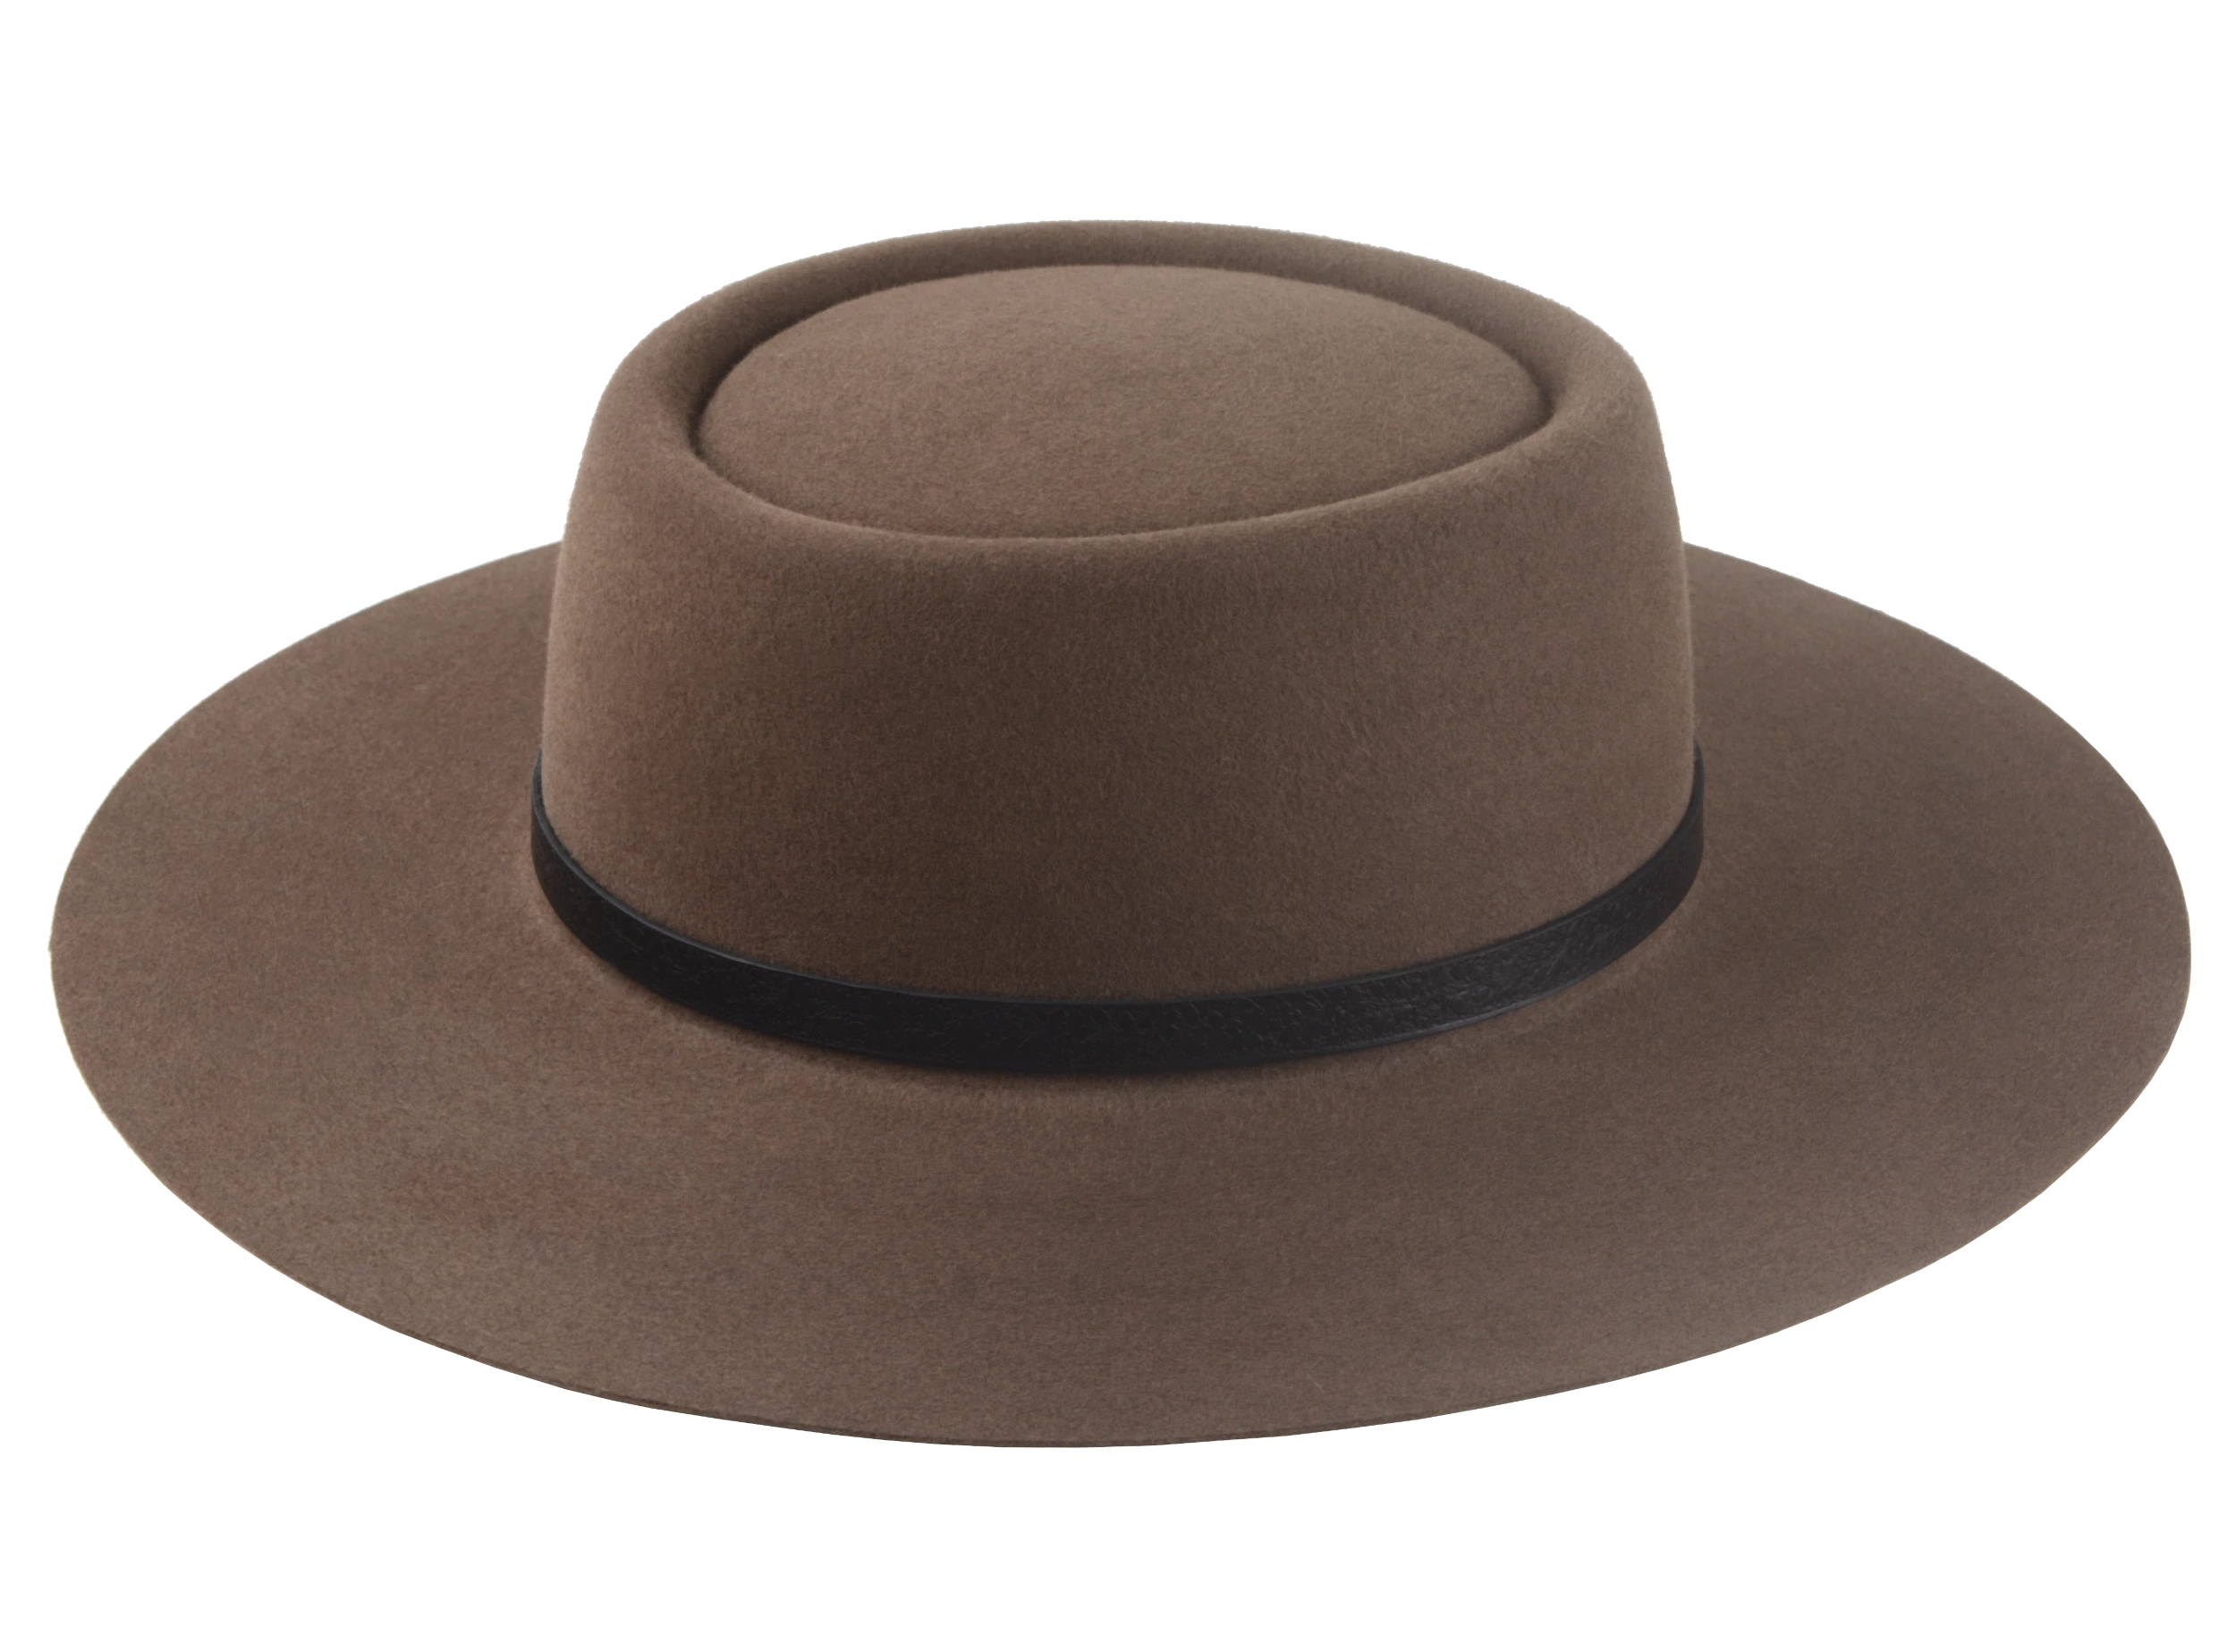 The Pioneer: Perspective shot emphasizing the 3 5/8-inch raw-edge flat brim for broad coverage | Agnoulita Hats